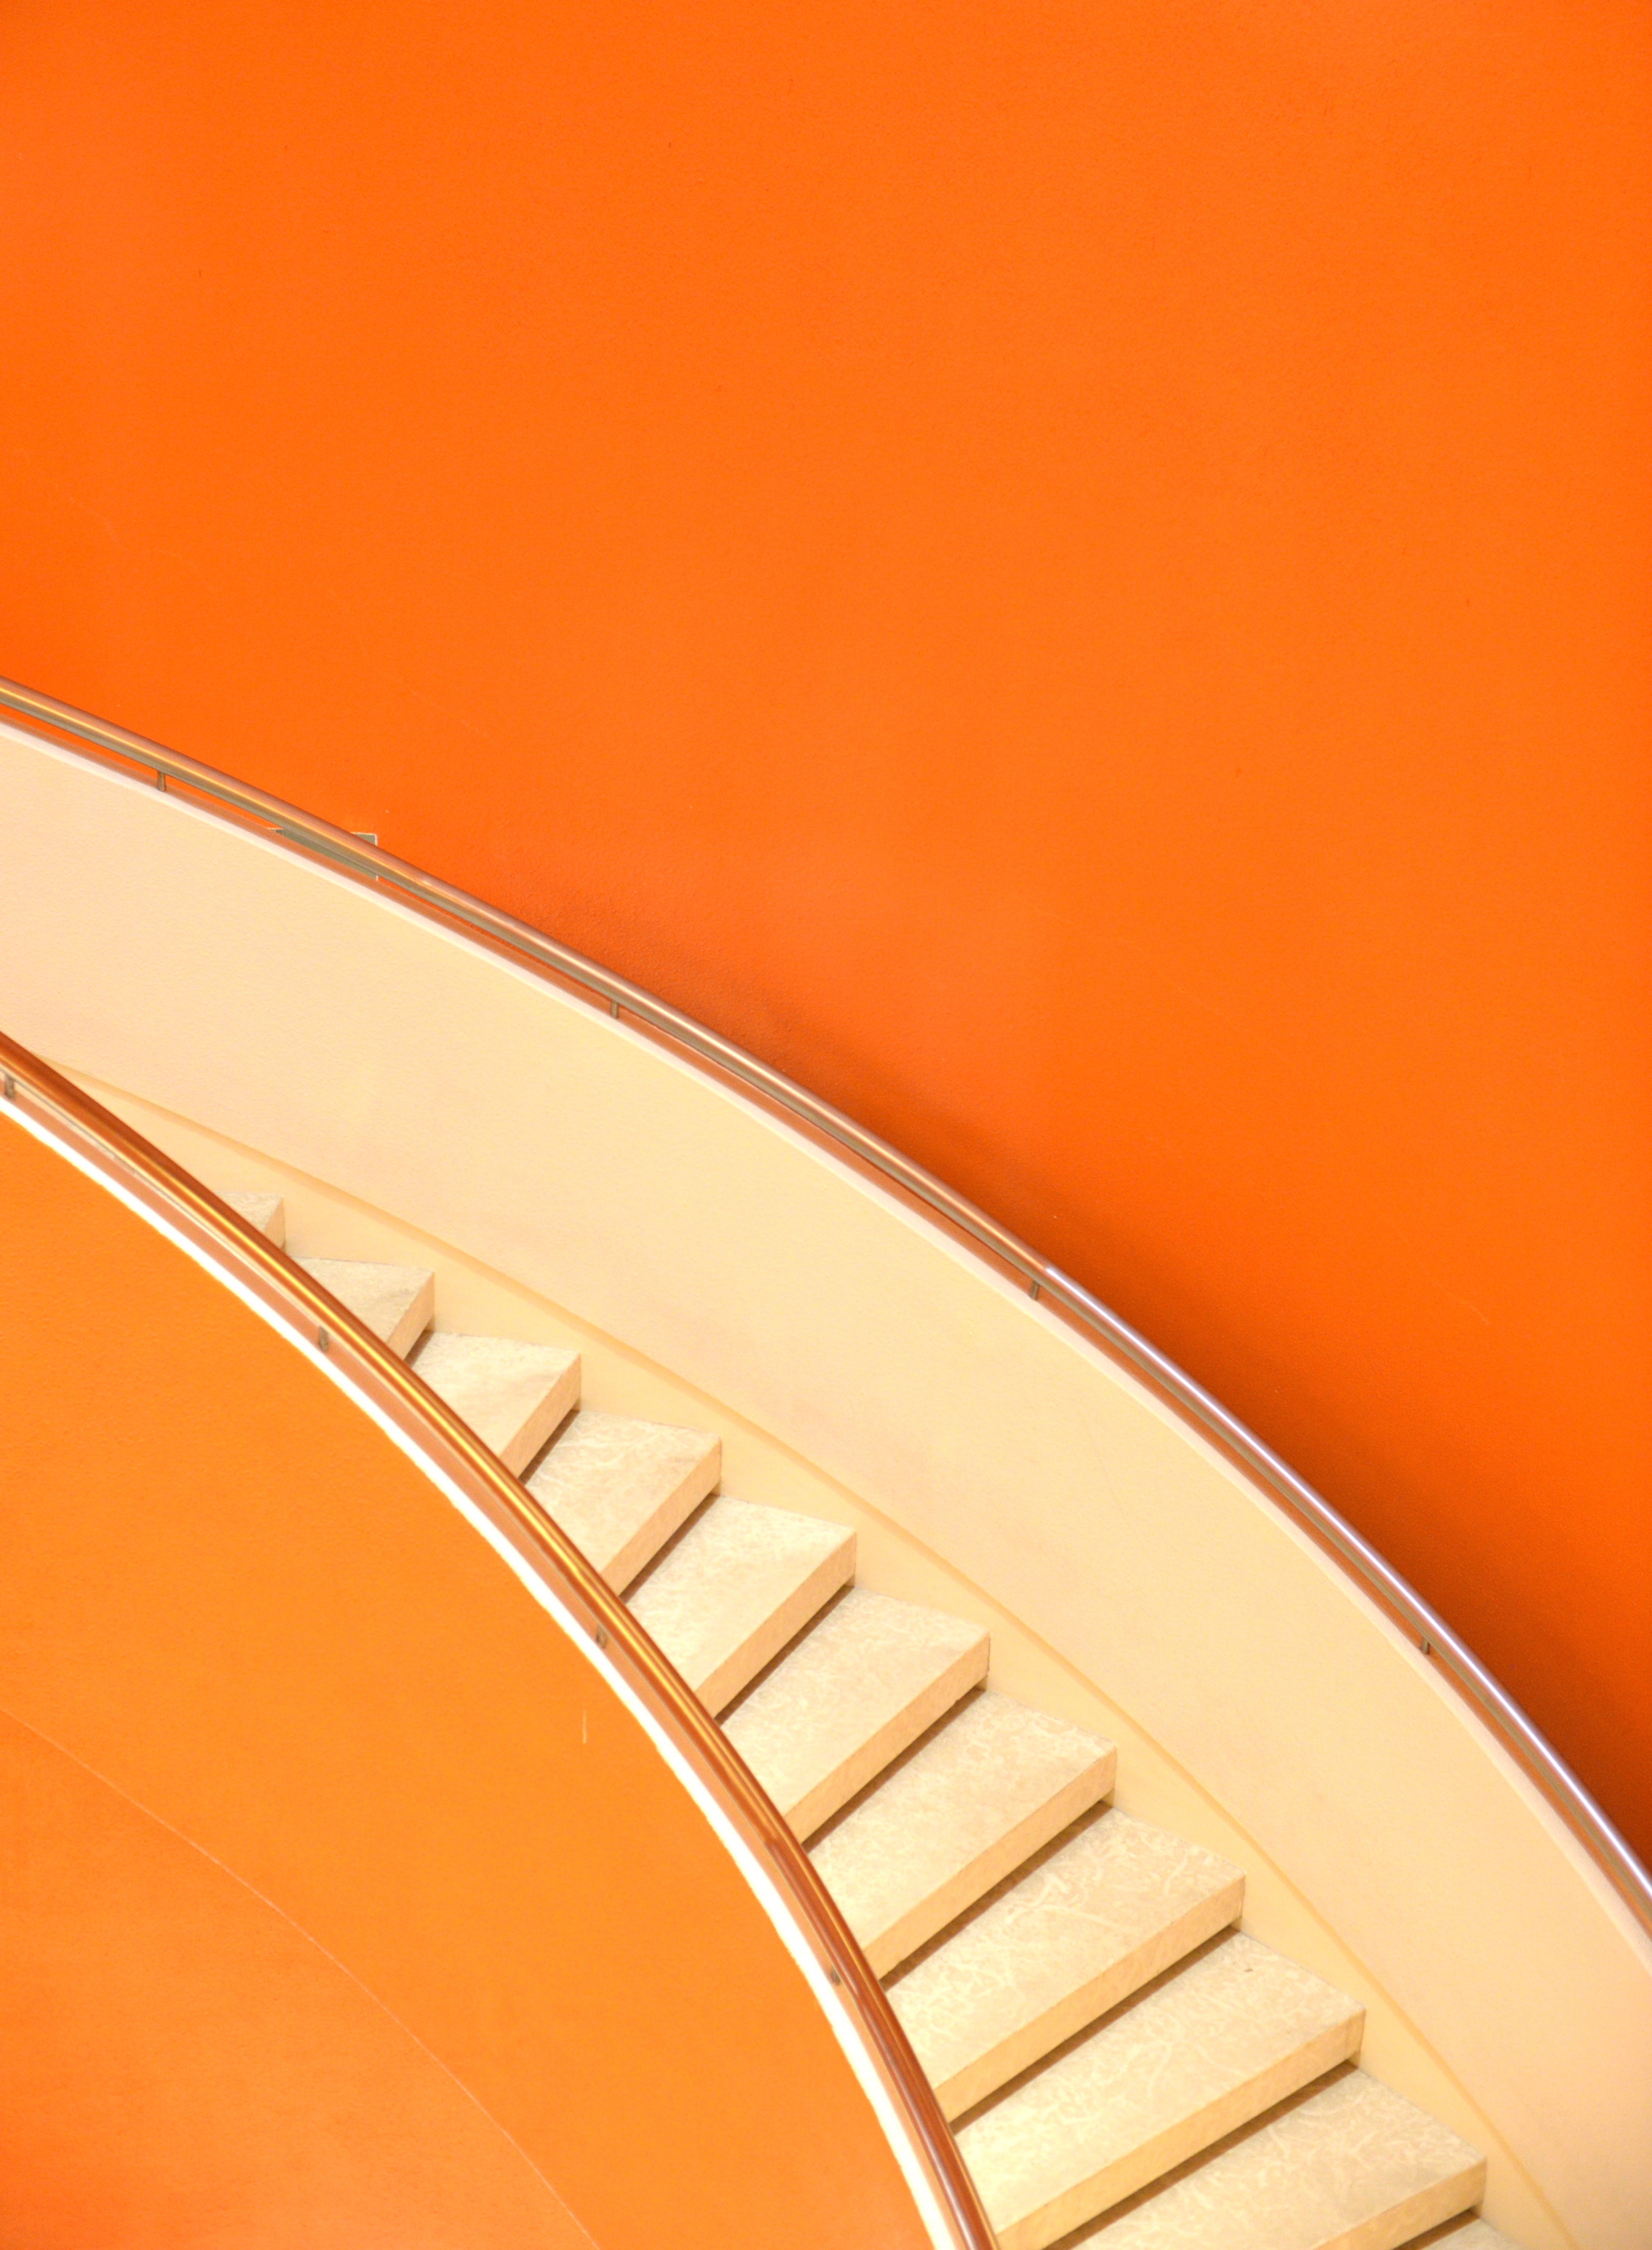 Artsy staircase with neon light and orange background.